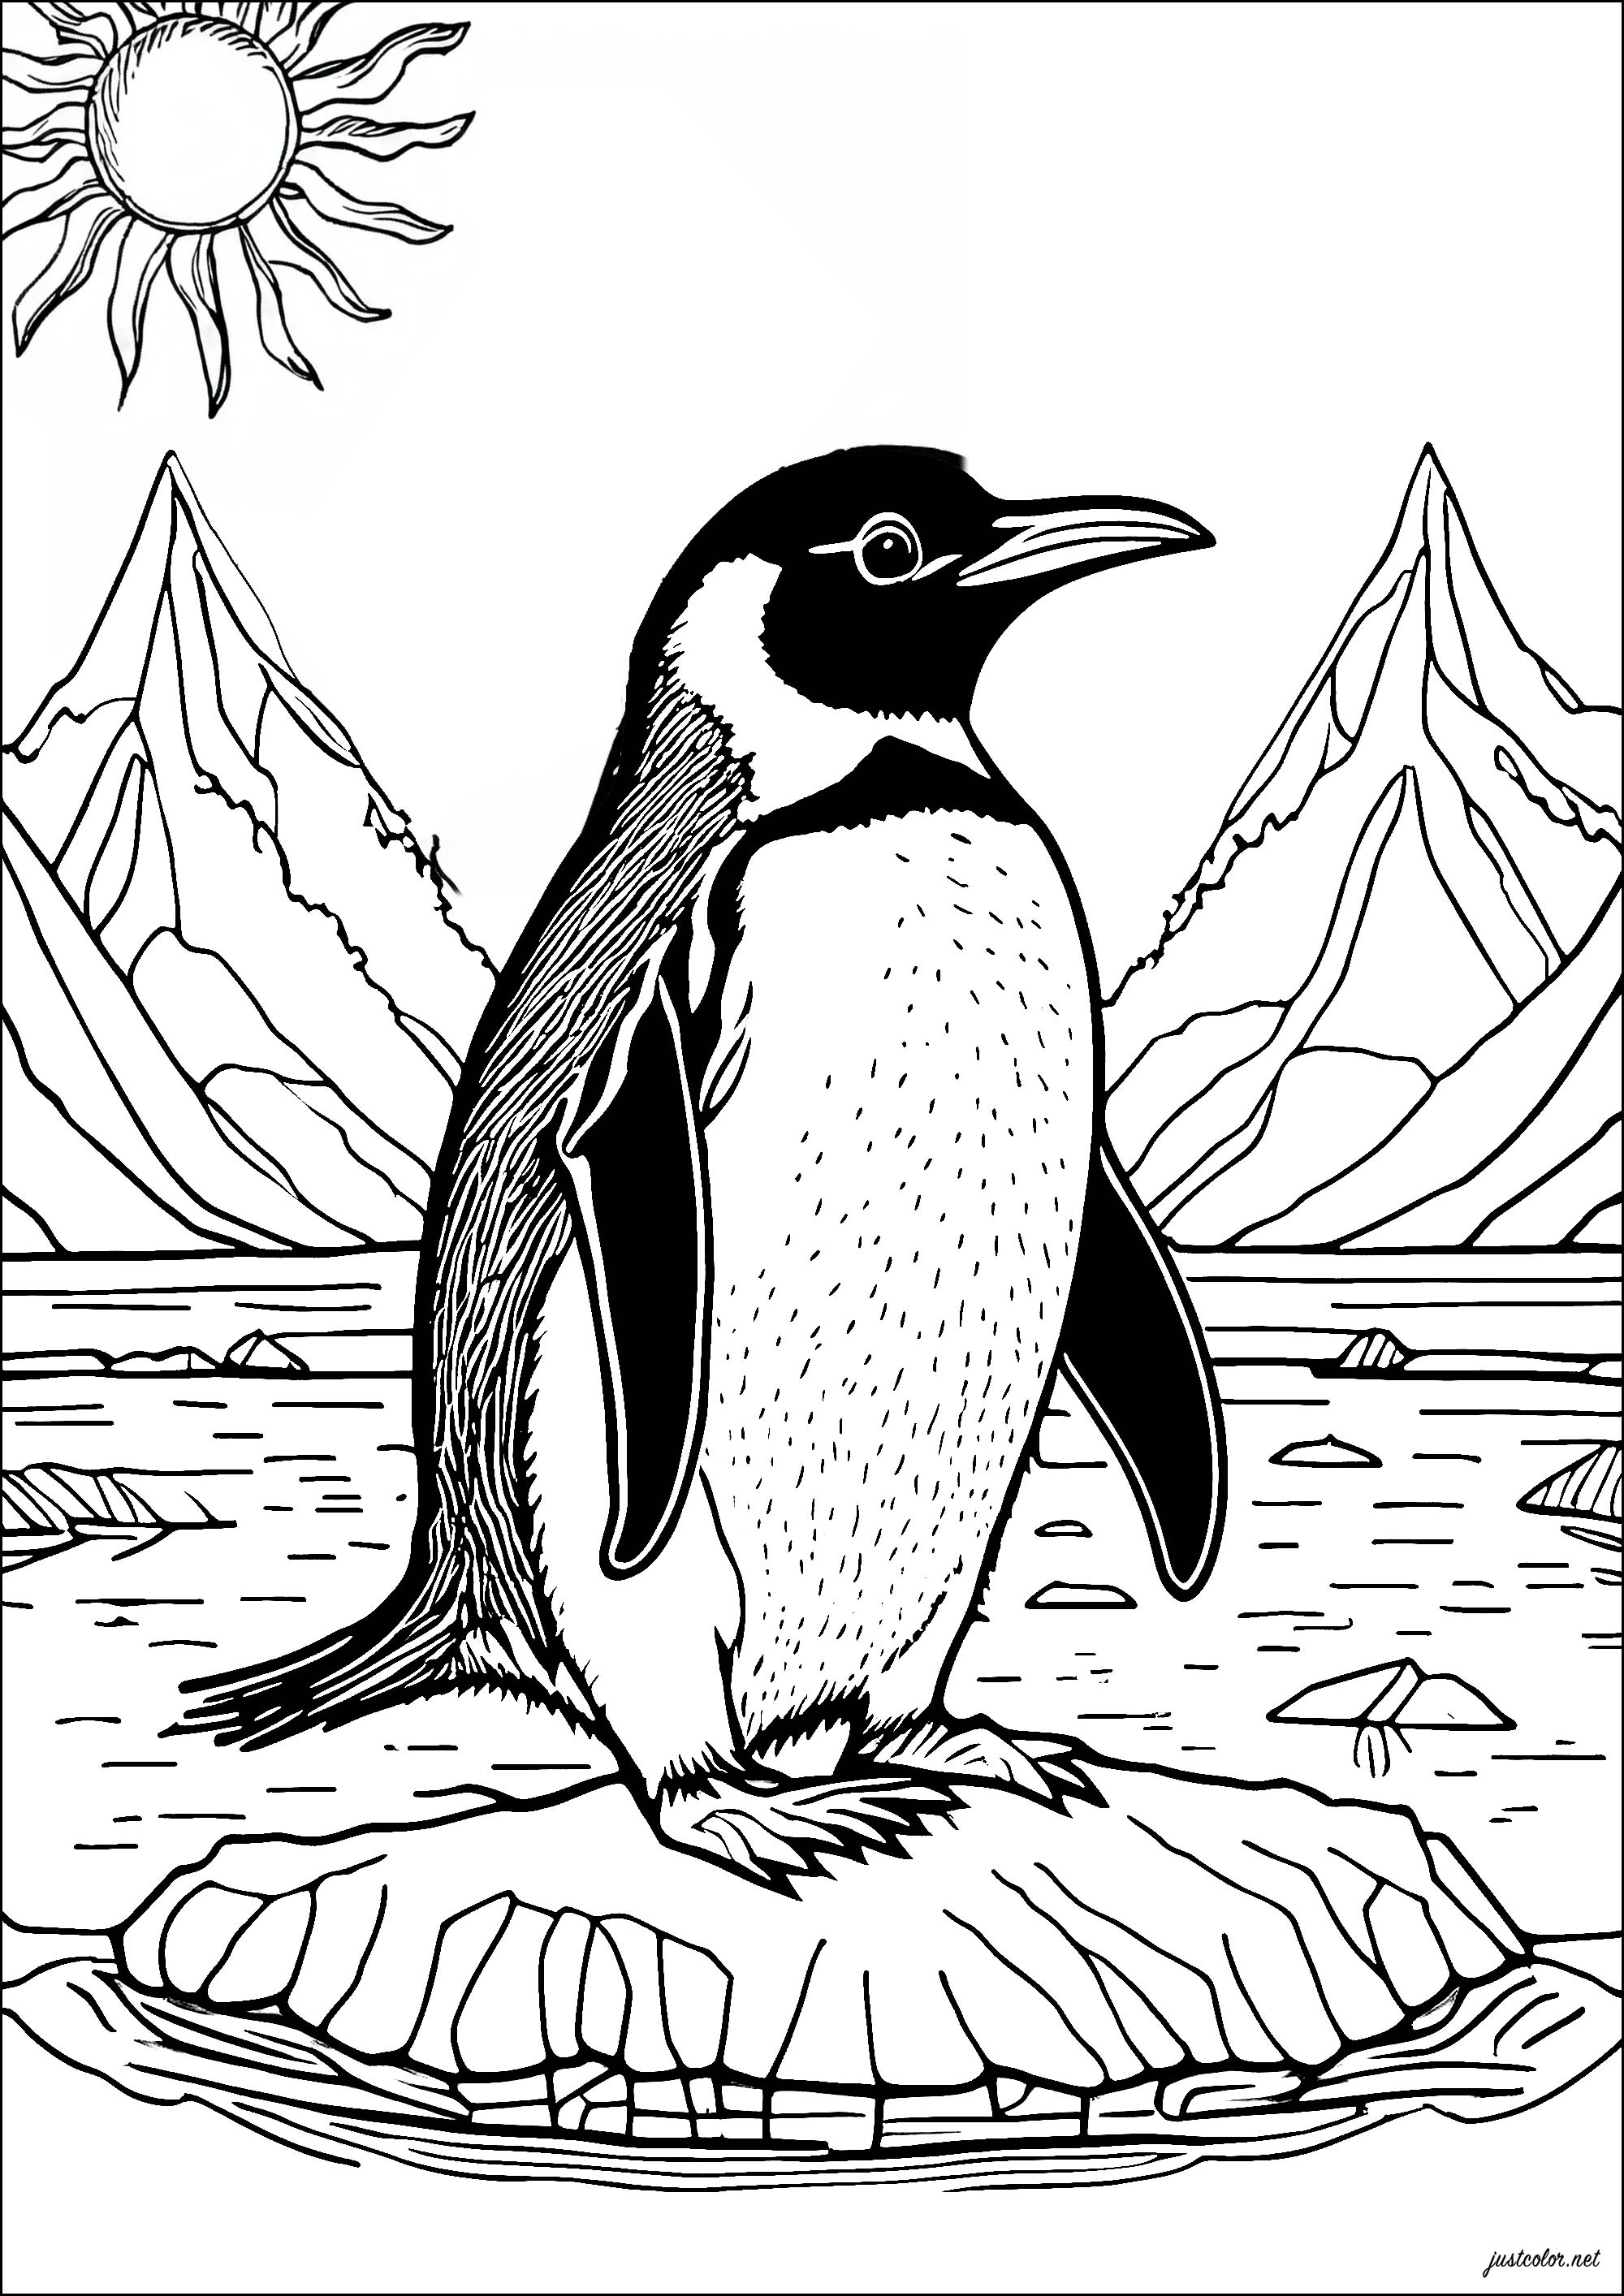 Pretty penguin on a block of ice. Find yourself on the ice floe with this beautiful coloring page